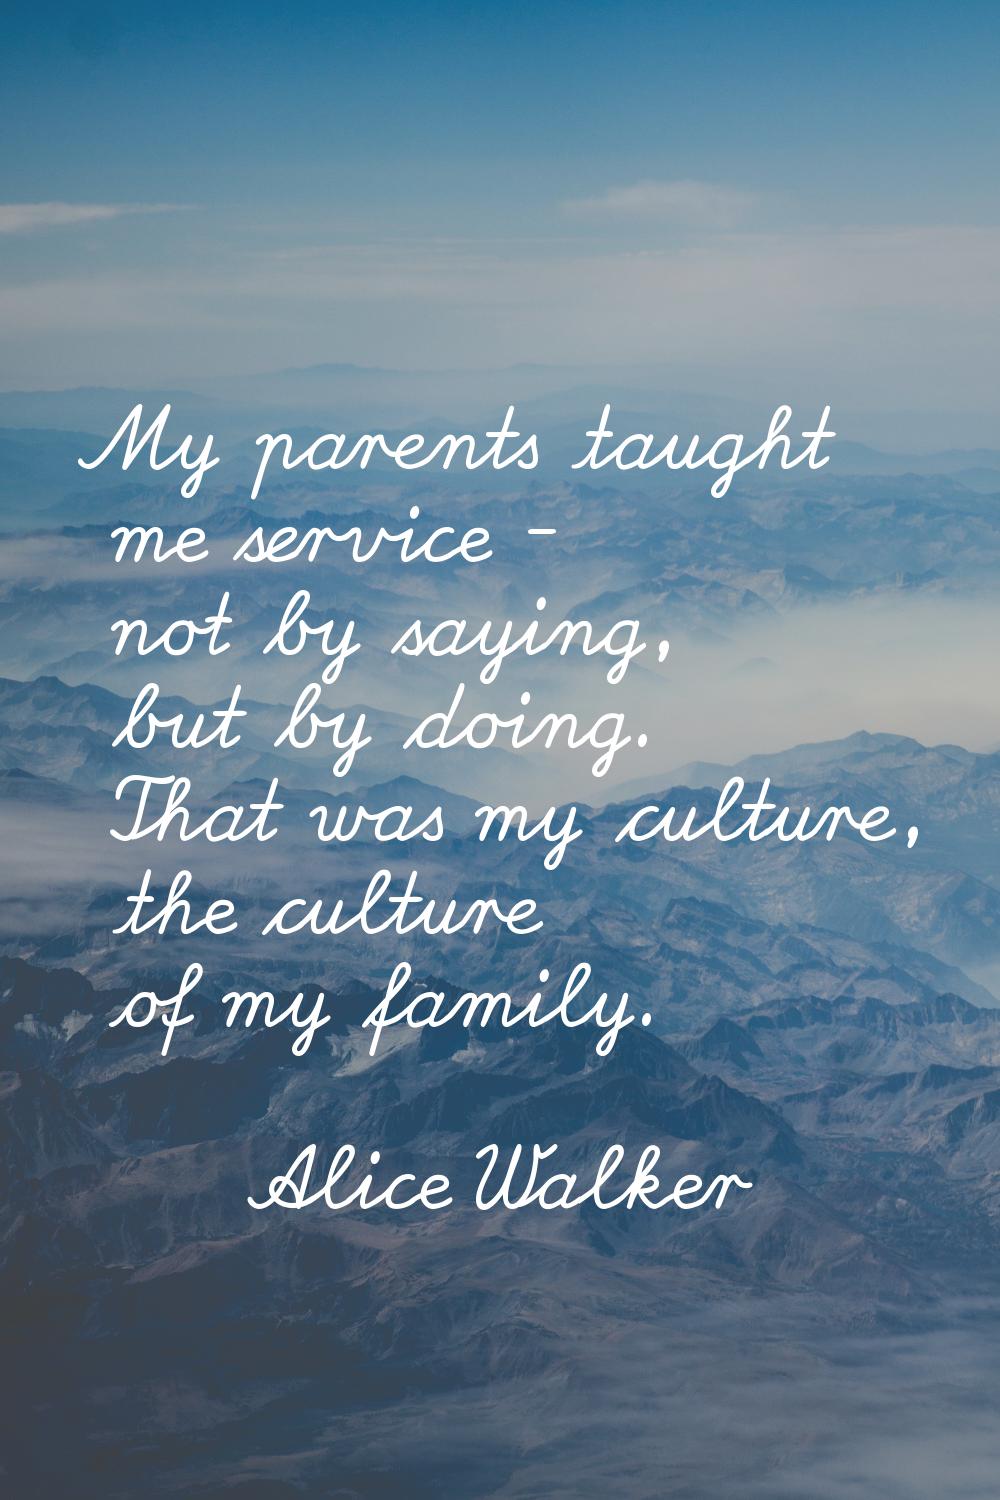 My parents taught me service - not by saying, but by doing. That was my culture, the culture of my 